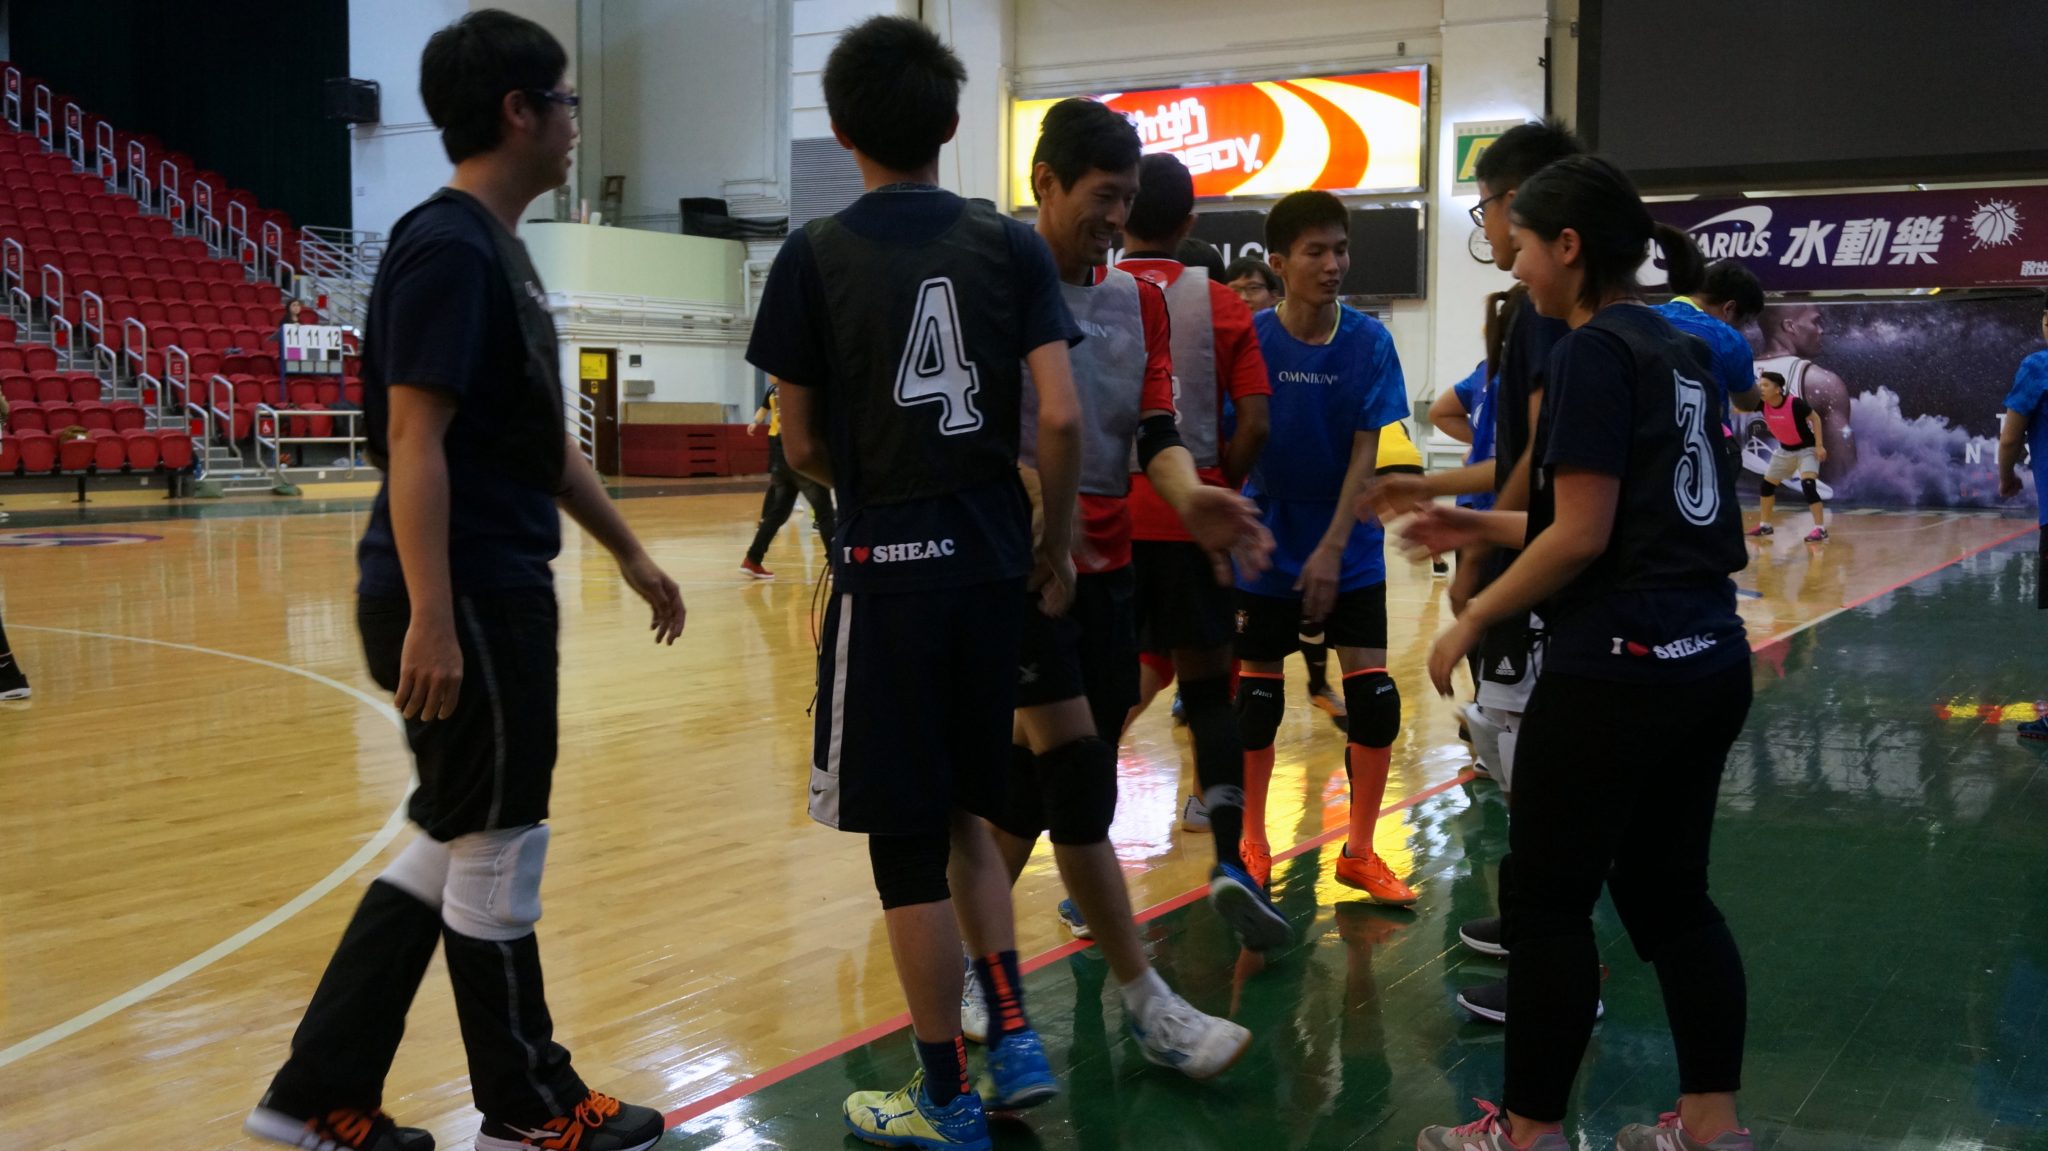 Handshakes with the Singapore team after the match. 賽後與新加坡隊握手